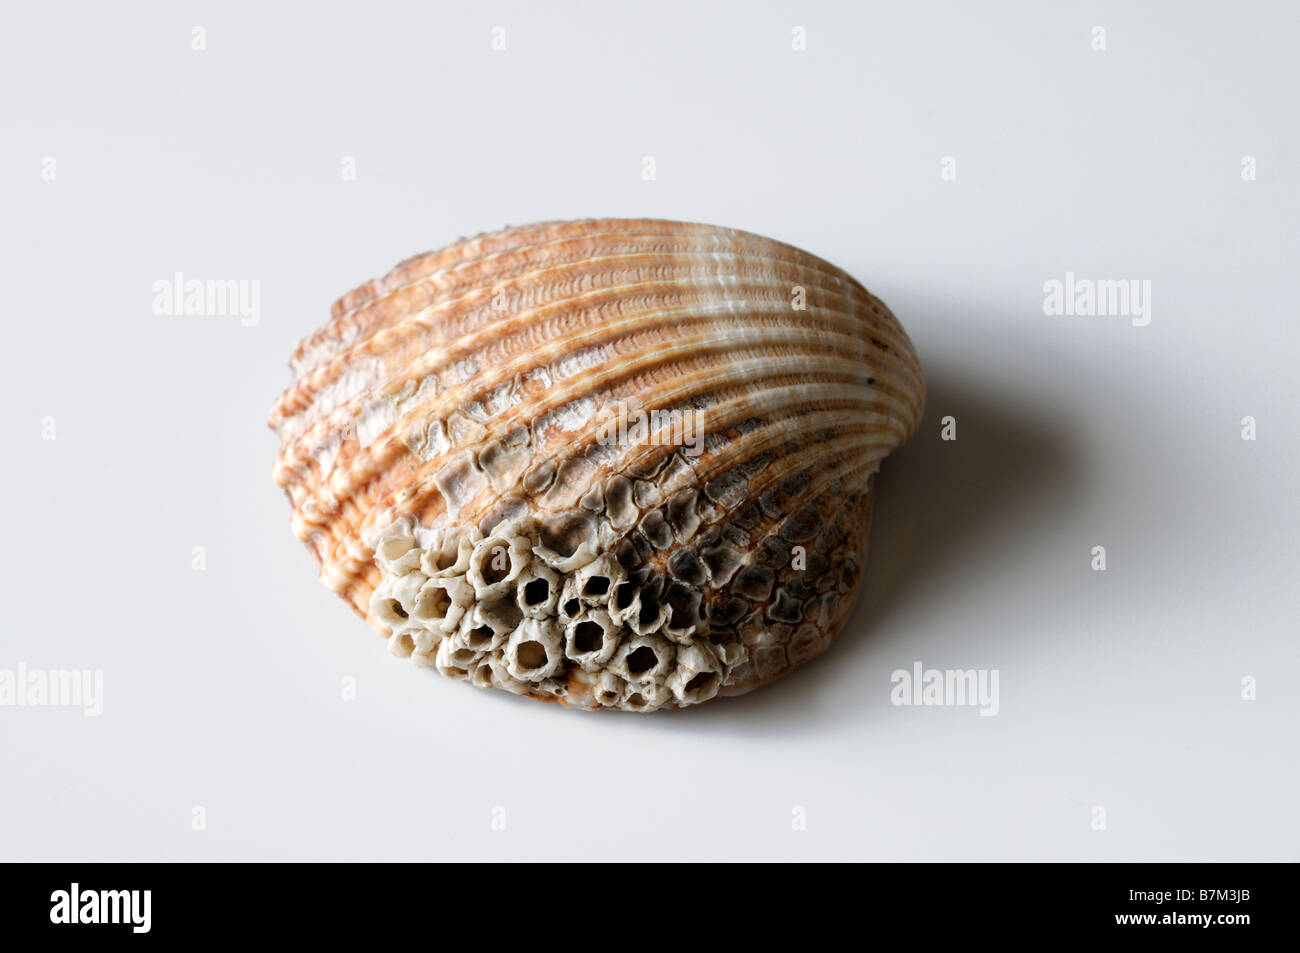 one single scallop shell seashell white background cutout detail closeup close up ribs ribbed radial Stock Photo